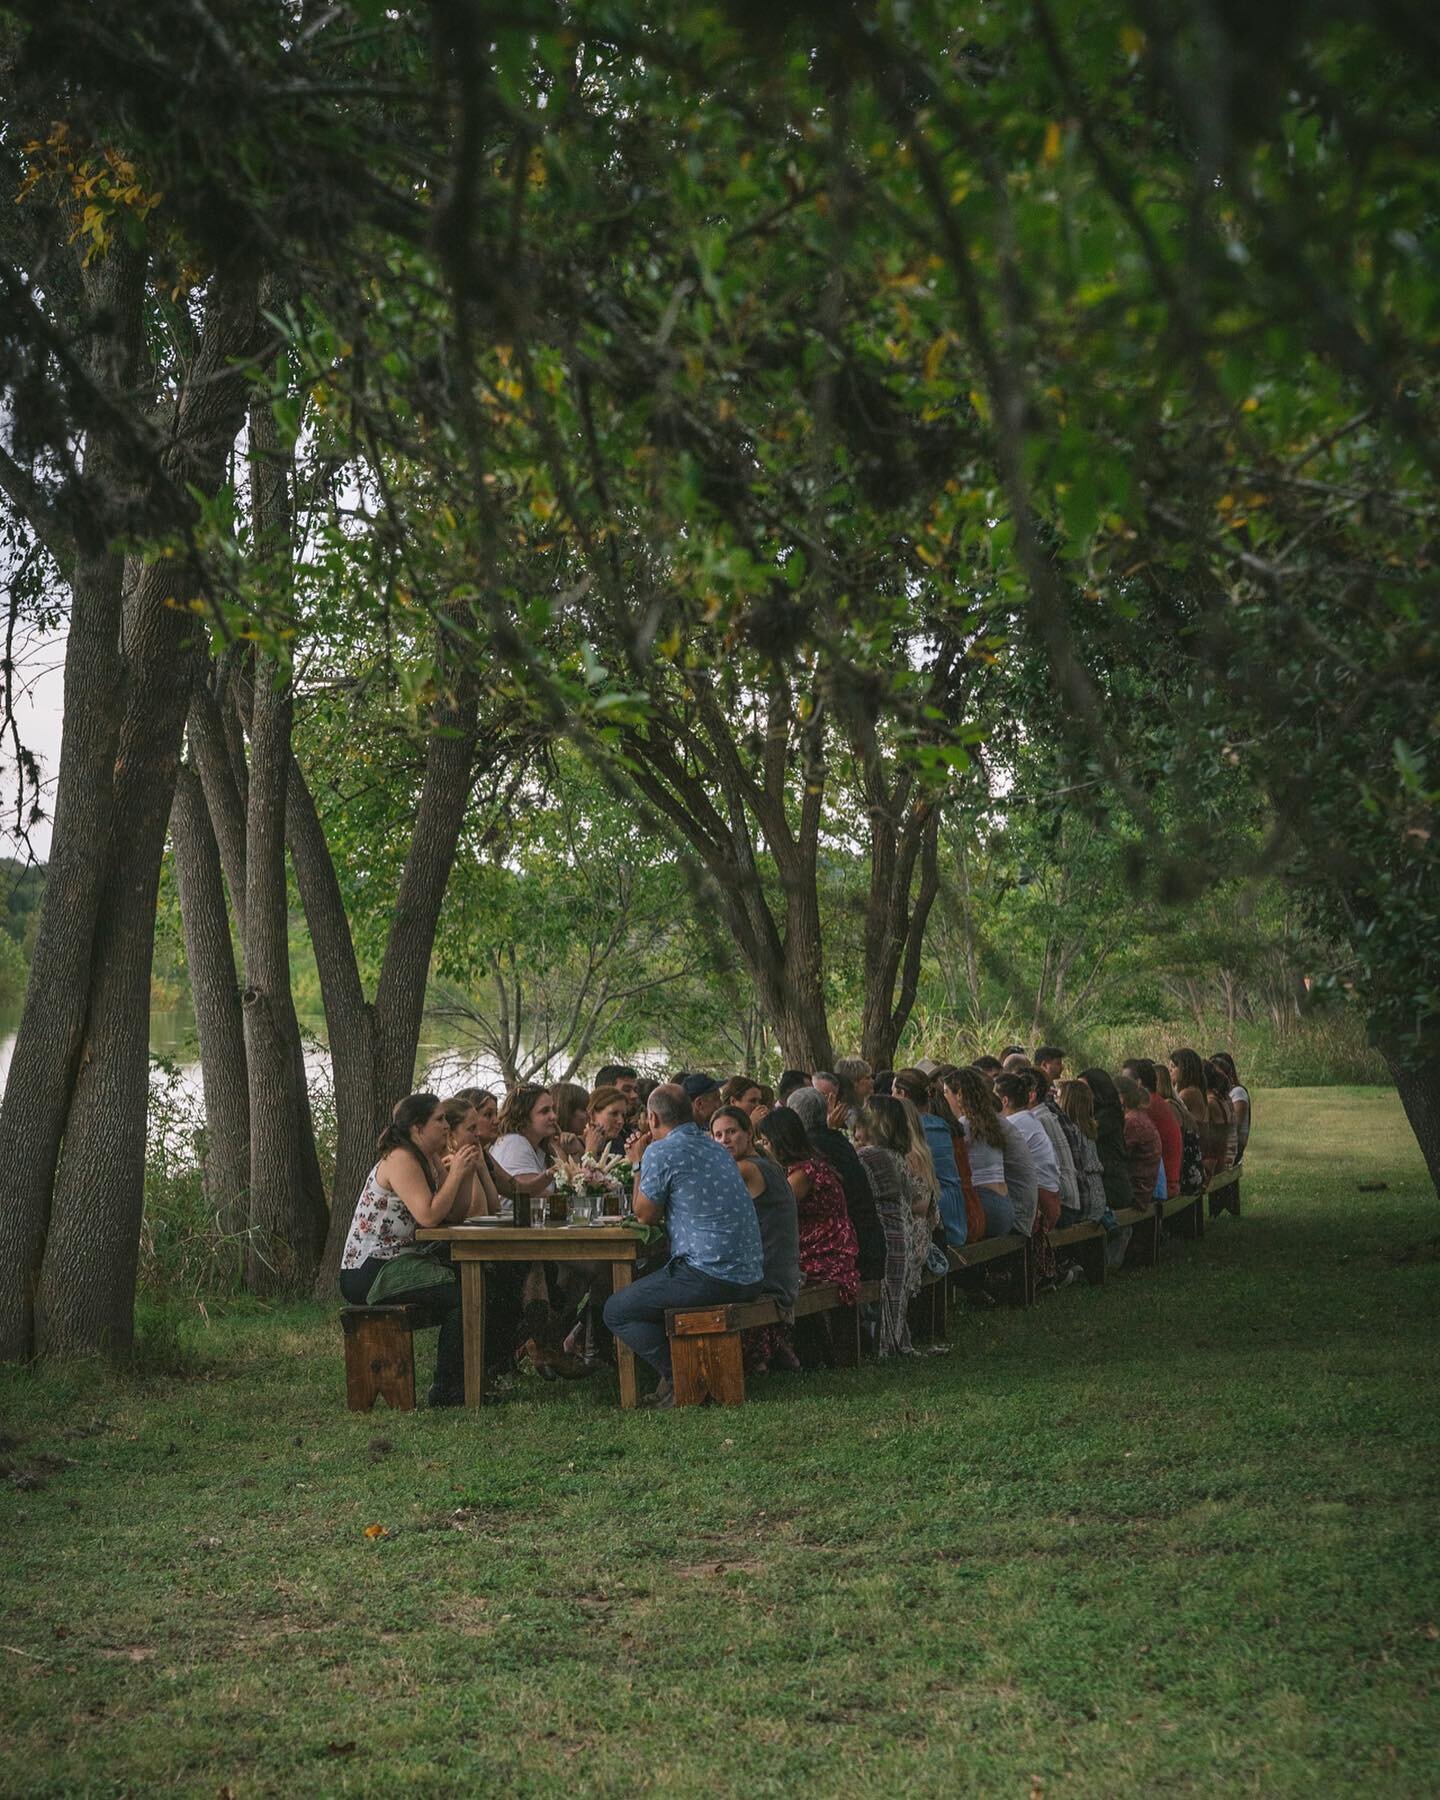 We are still reveling in the many beautiful moments from our Supper Texas ✨✨✨ At the Pedernales River Nature Park, just outside of Austin, our guests enjoyed a refreshing  @brothersbondbourbon basil Collins and small bites by Chef @mcarterfood, befor